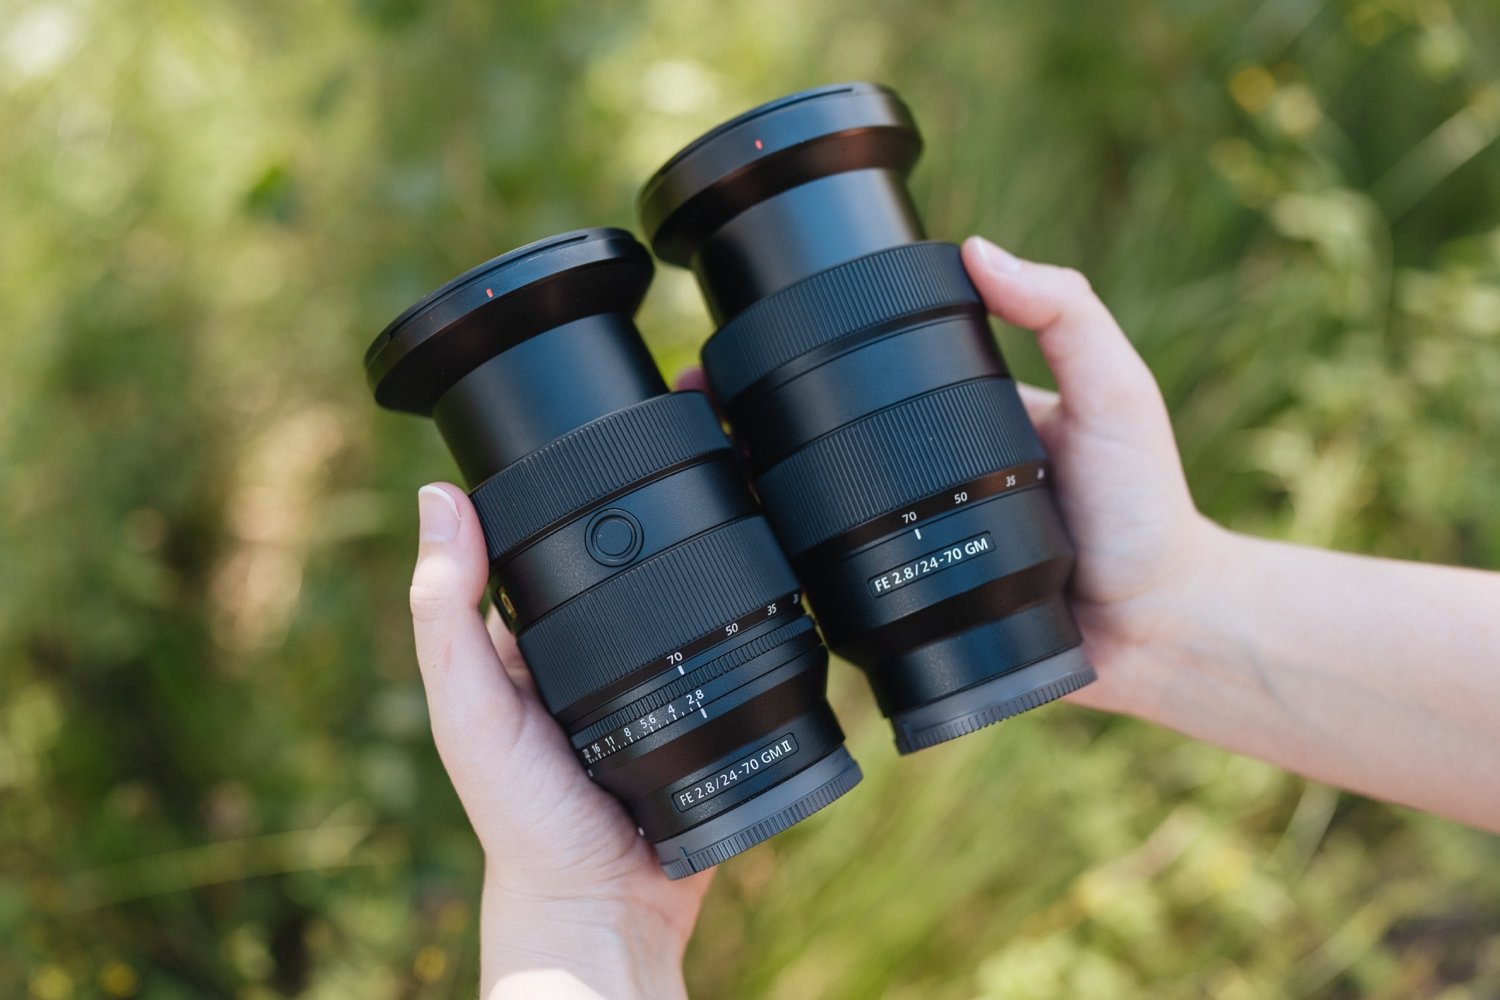 Hands-on with the Sony 24-70mm F2.8 GM II: Digital Photography Review